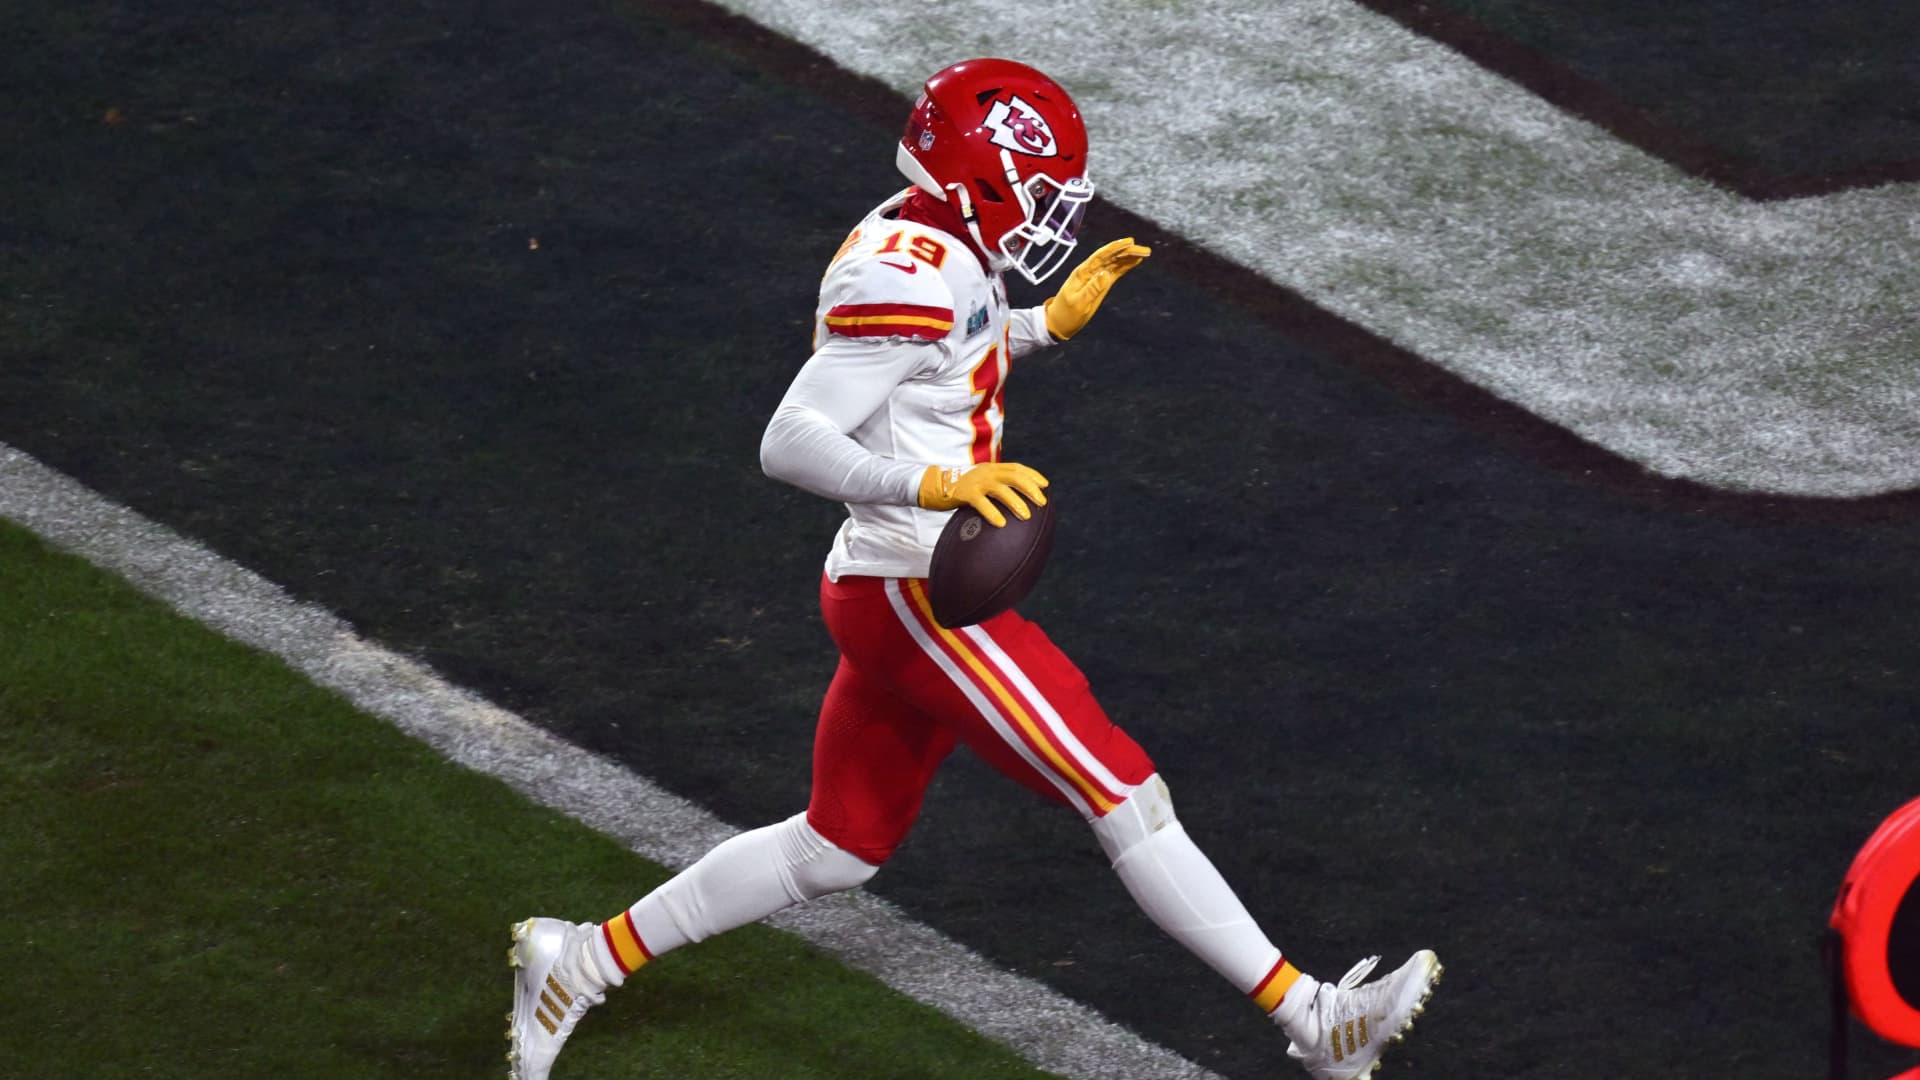 Kansas City Chiefs' wide reciever Kadarius Toney step into the end zone and scores a touchdown during Super Bowl LVII between the Kansas City Chiefs and the Philadelphia Eagles at State Farm Stadium in Glendale, Arizona, on February 12, 2023.